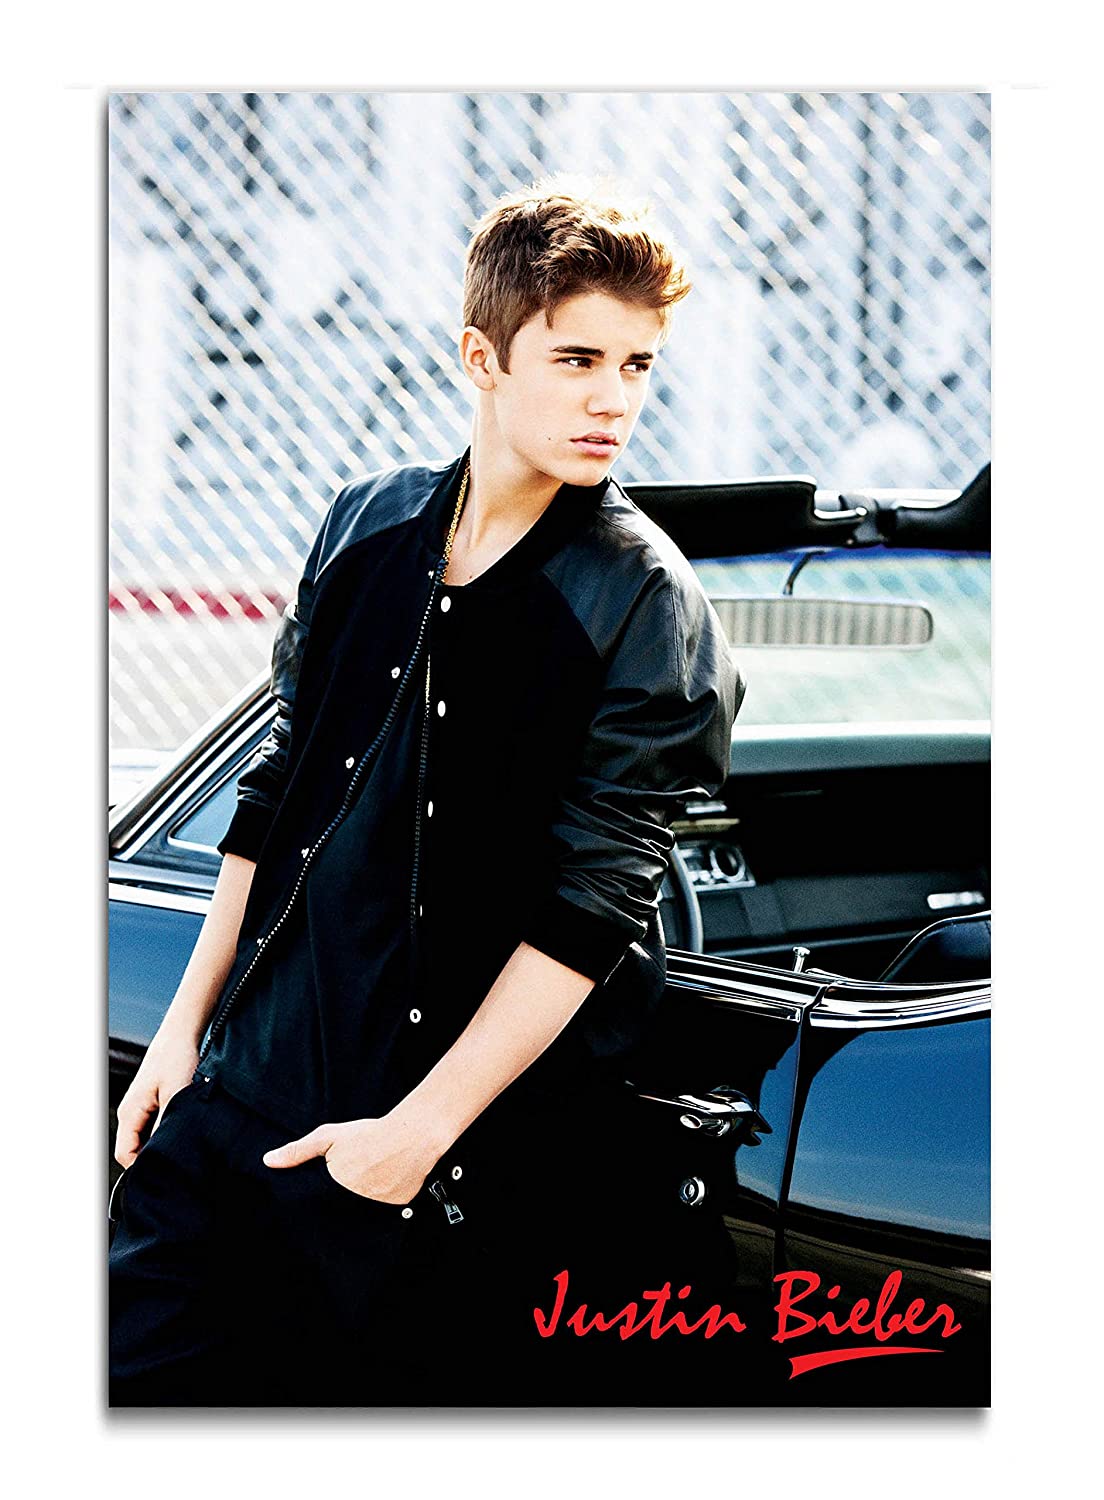 Tamatina Wall Poster Bieber Poster Size Poster Quality inches x 24 inches (92 cms x 61 cms): Amazon.in: Home & Kitchen